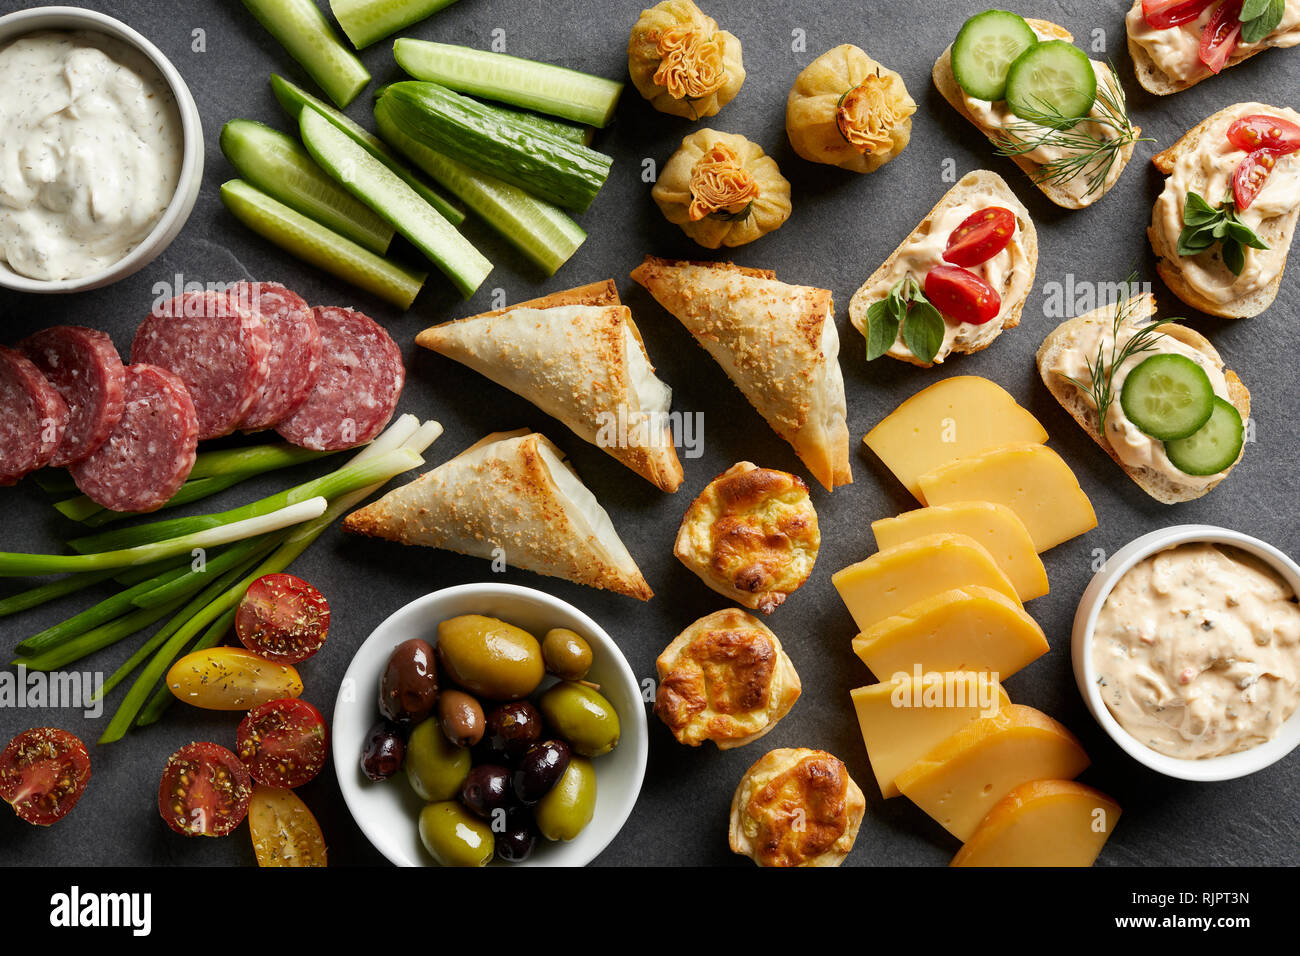 Appetiser snack spread with open sandwiches, olives and cheese , overhead view Stock Photo